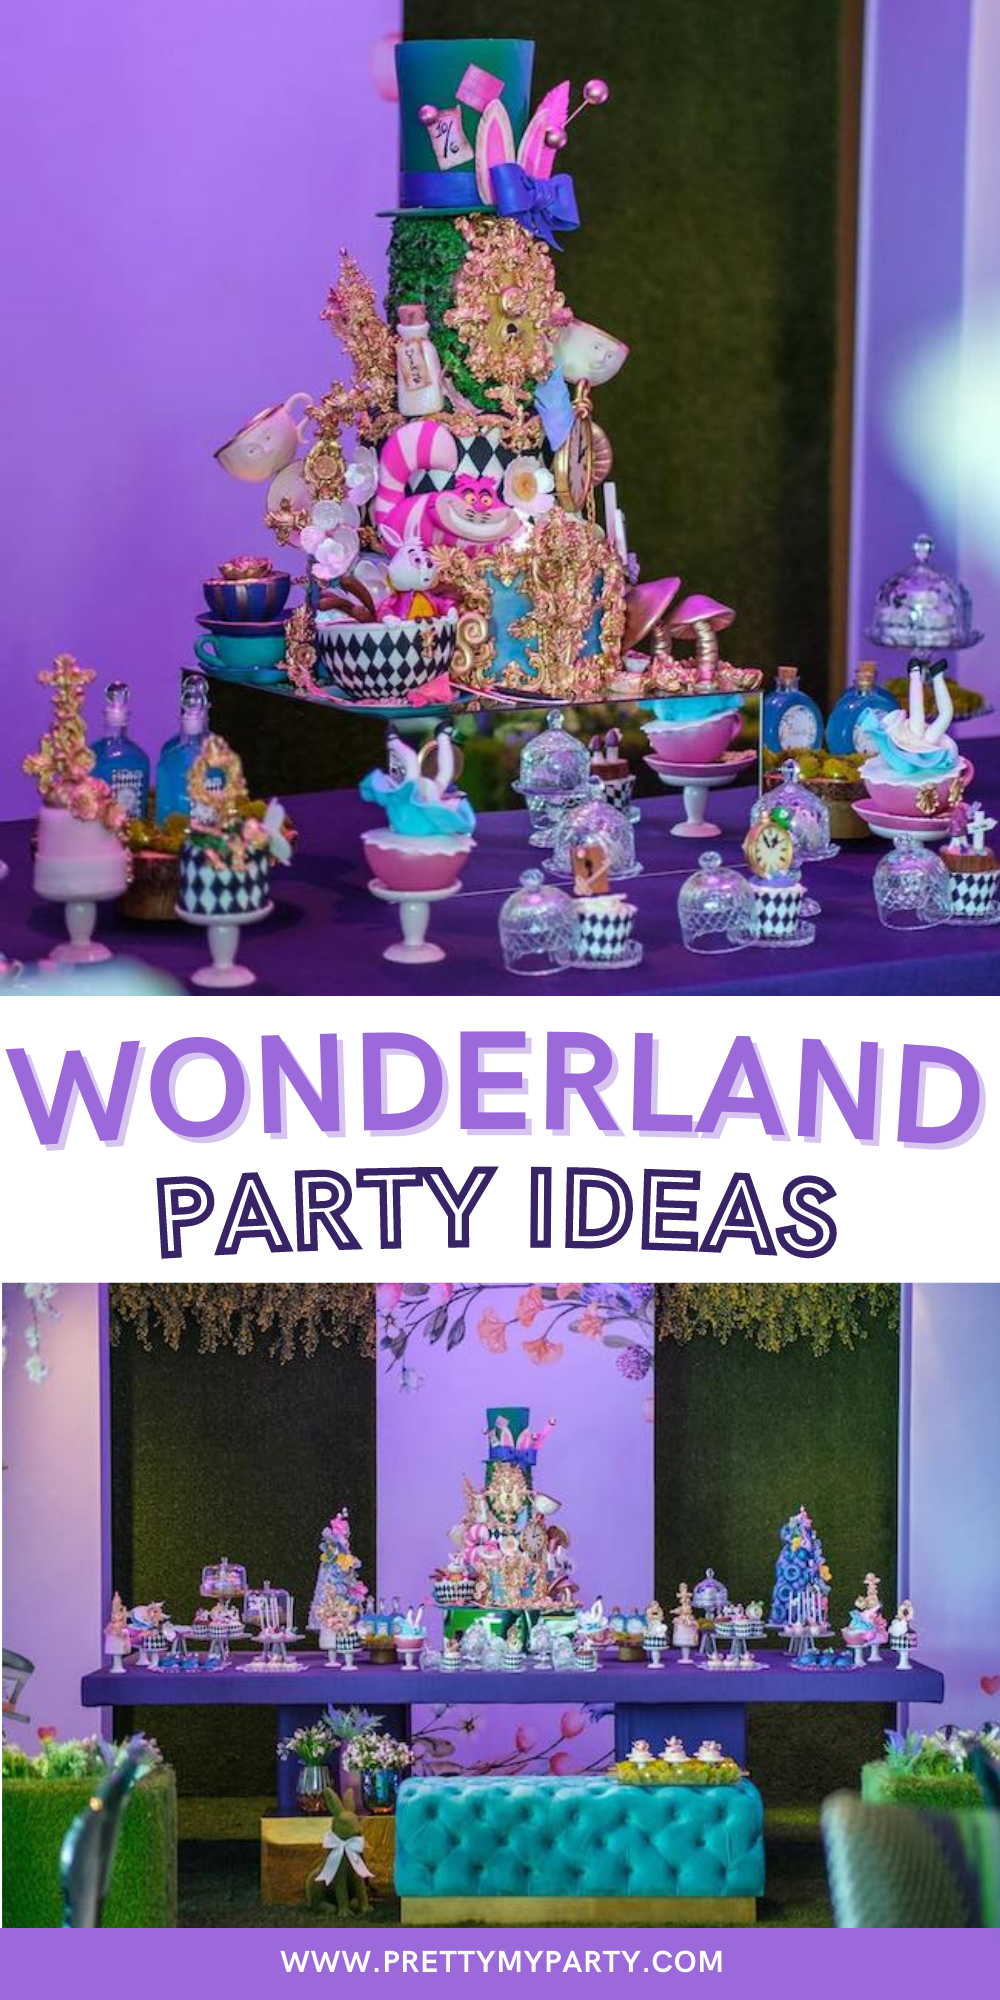 Alice in Wonderland Theme Decorations - Prom Themes